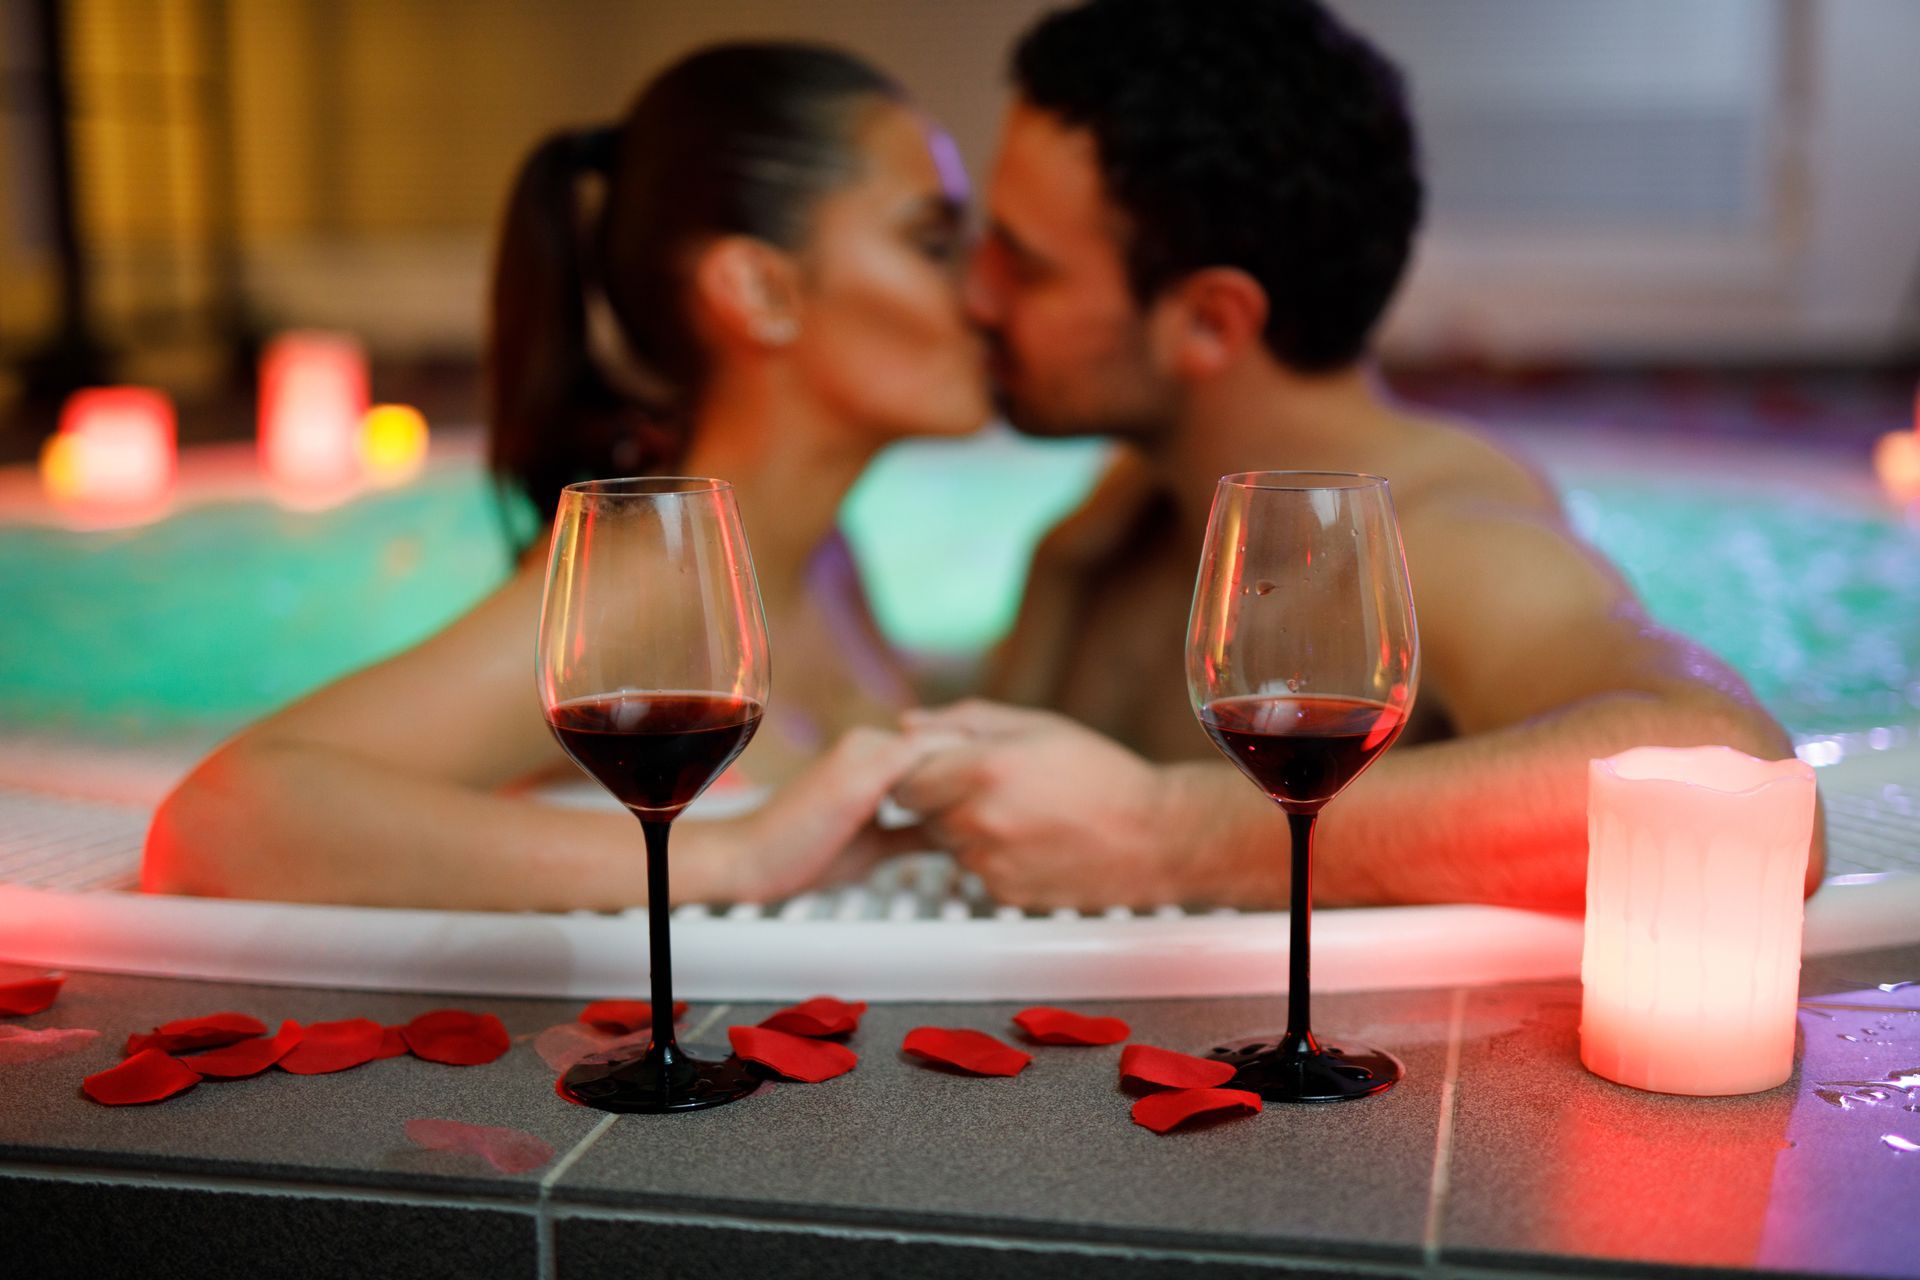 A man and a woman are kissing in a hot tub with wine glasses and candles.